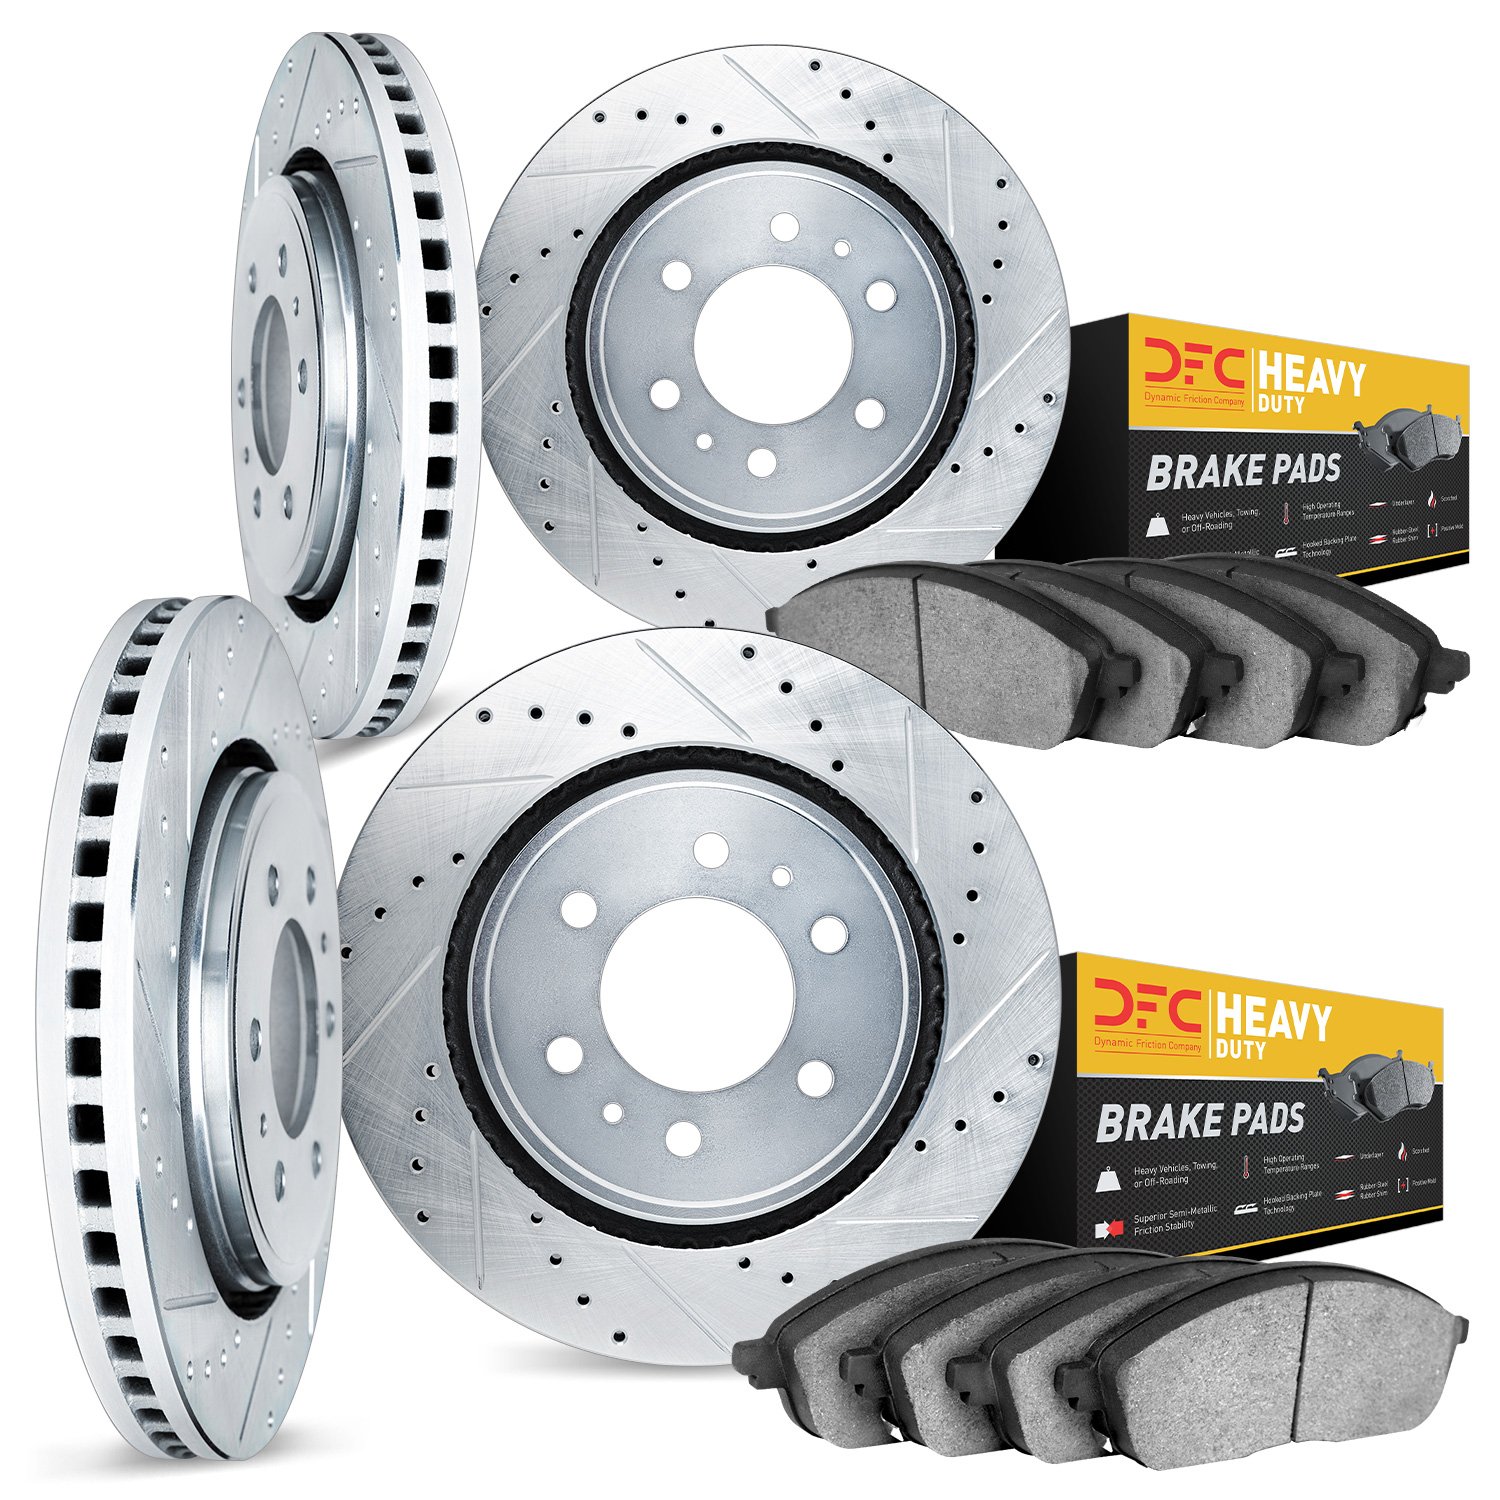 7204-99076 Drilled/Slotted Rotors w/Heavy-Duty Brake Pads Kit [Silver], 2002-2006 Ford/Lincoln/Mercury/Mazda, Position: Front an